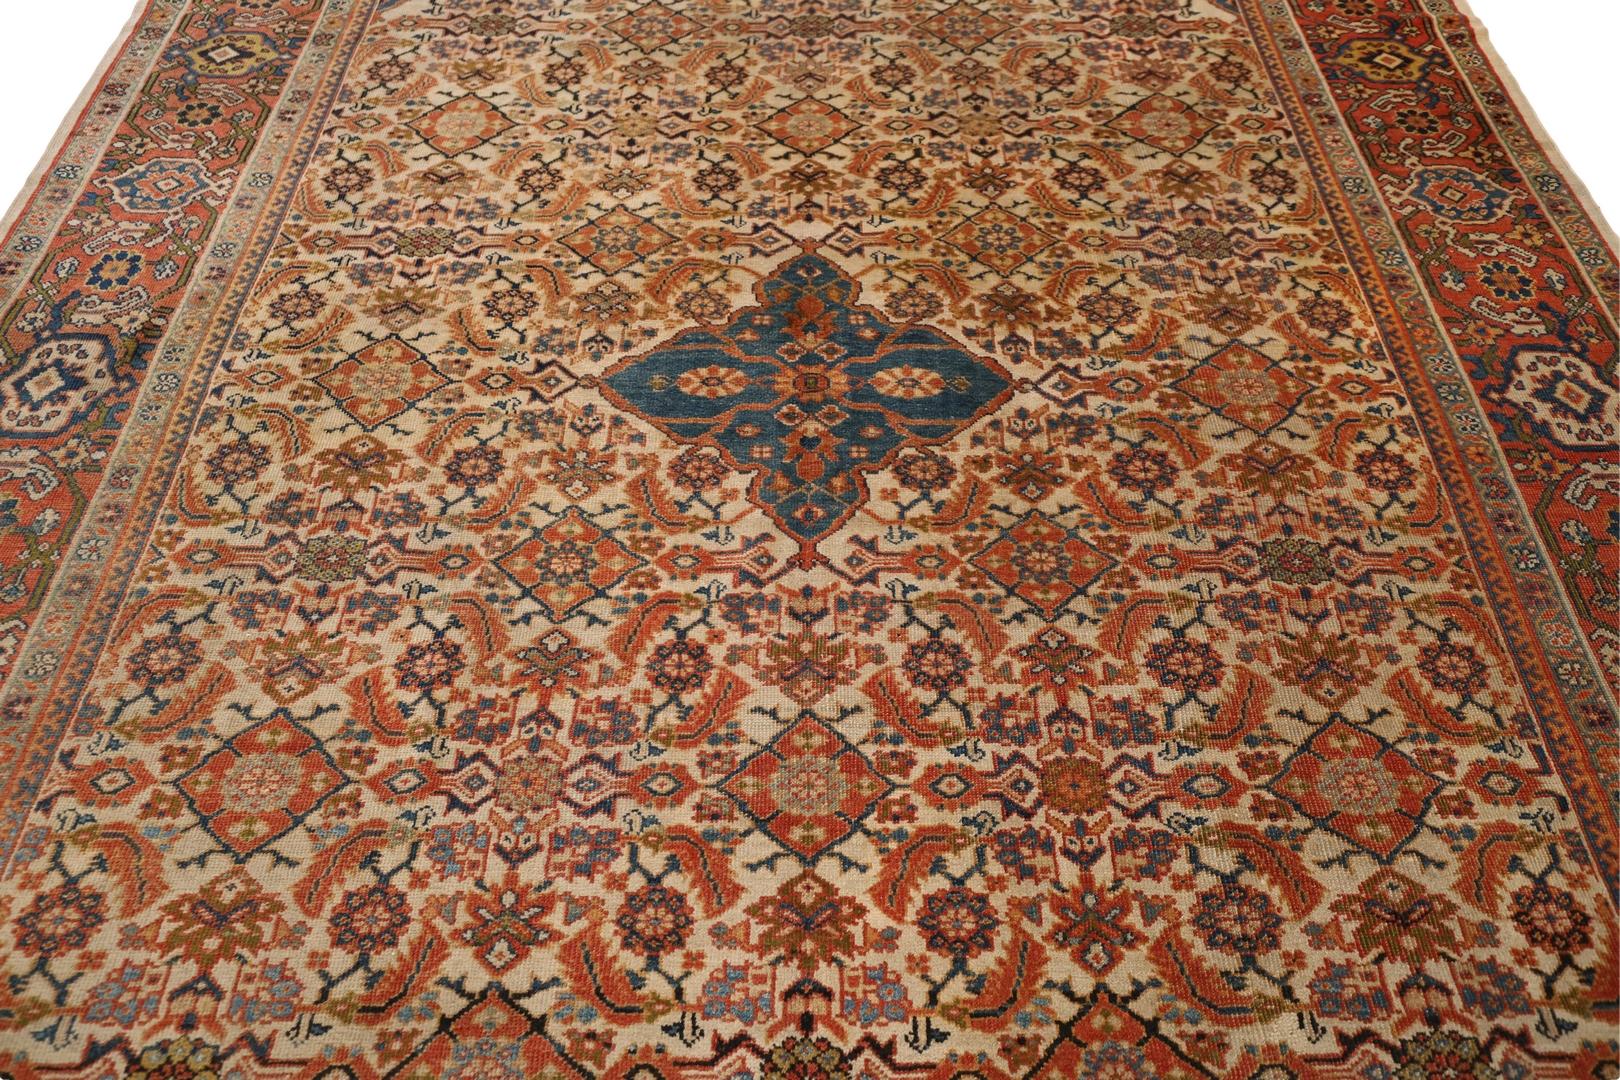 Wool Sultanabad Antique Rug, Ivory Red Blue - 8'11